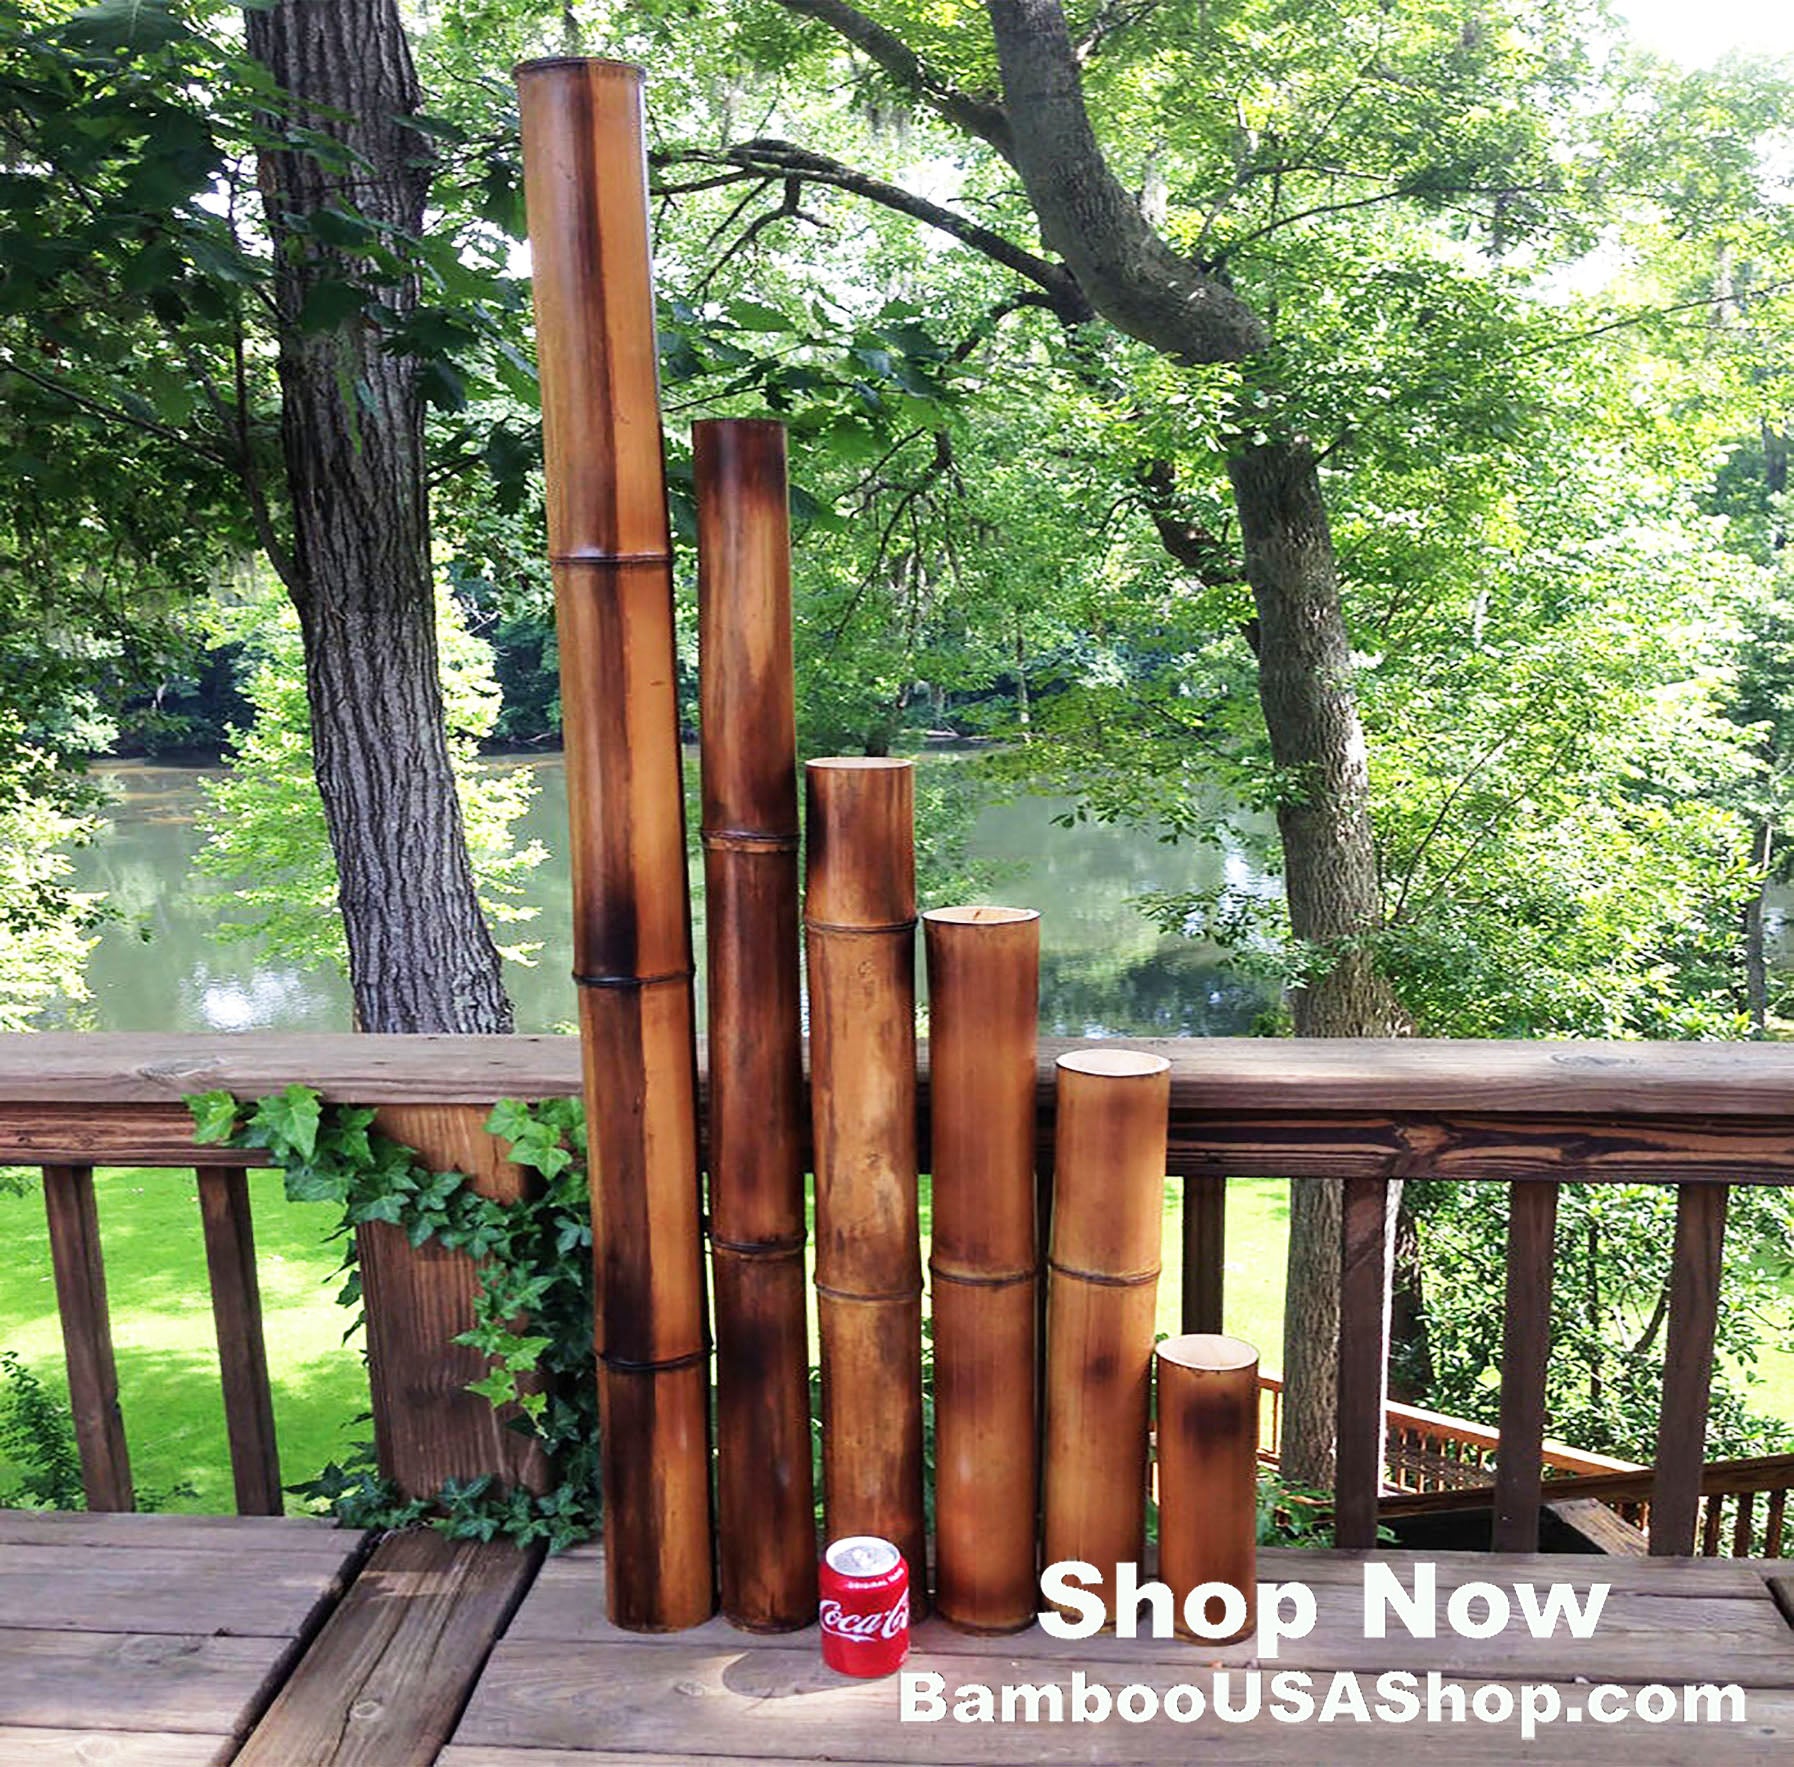 We Offer Decorative Bamboo Sticks, Canes, and Poles Sunset Bamboo